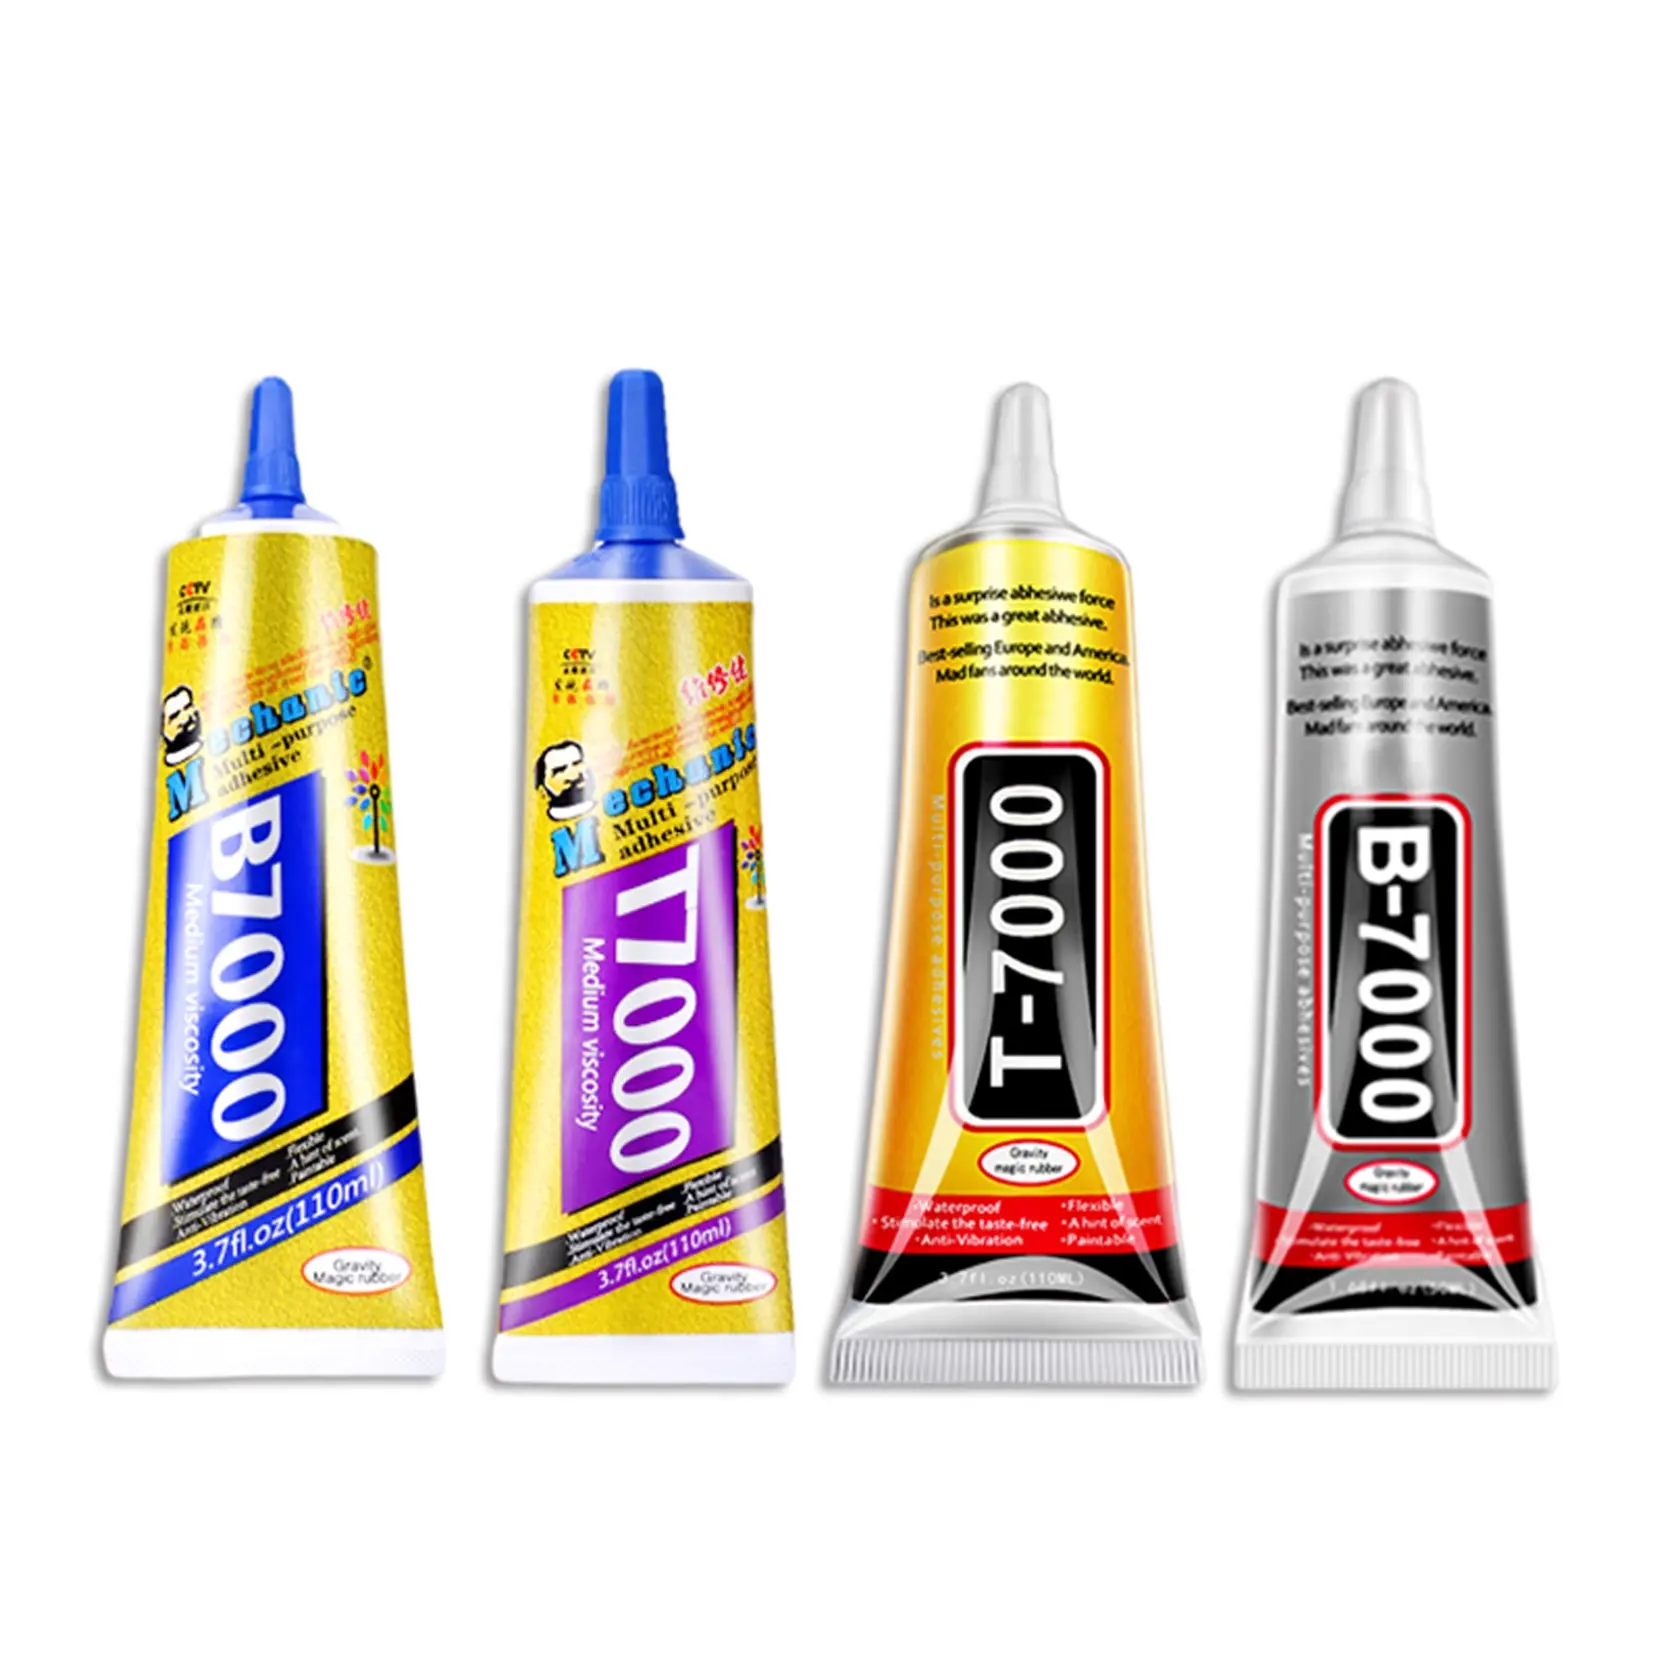 Mechanic 110ml B7000 T7000 T9000 Glue Multi Purpose Adhesive Repair For Cell Phone Crafts Glass LCD Touch Screen Super Glue